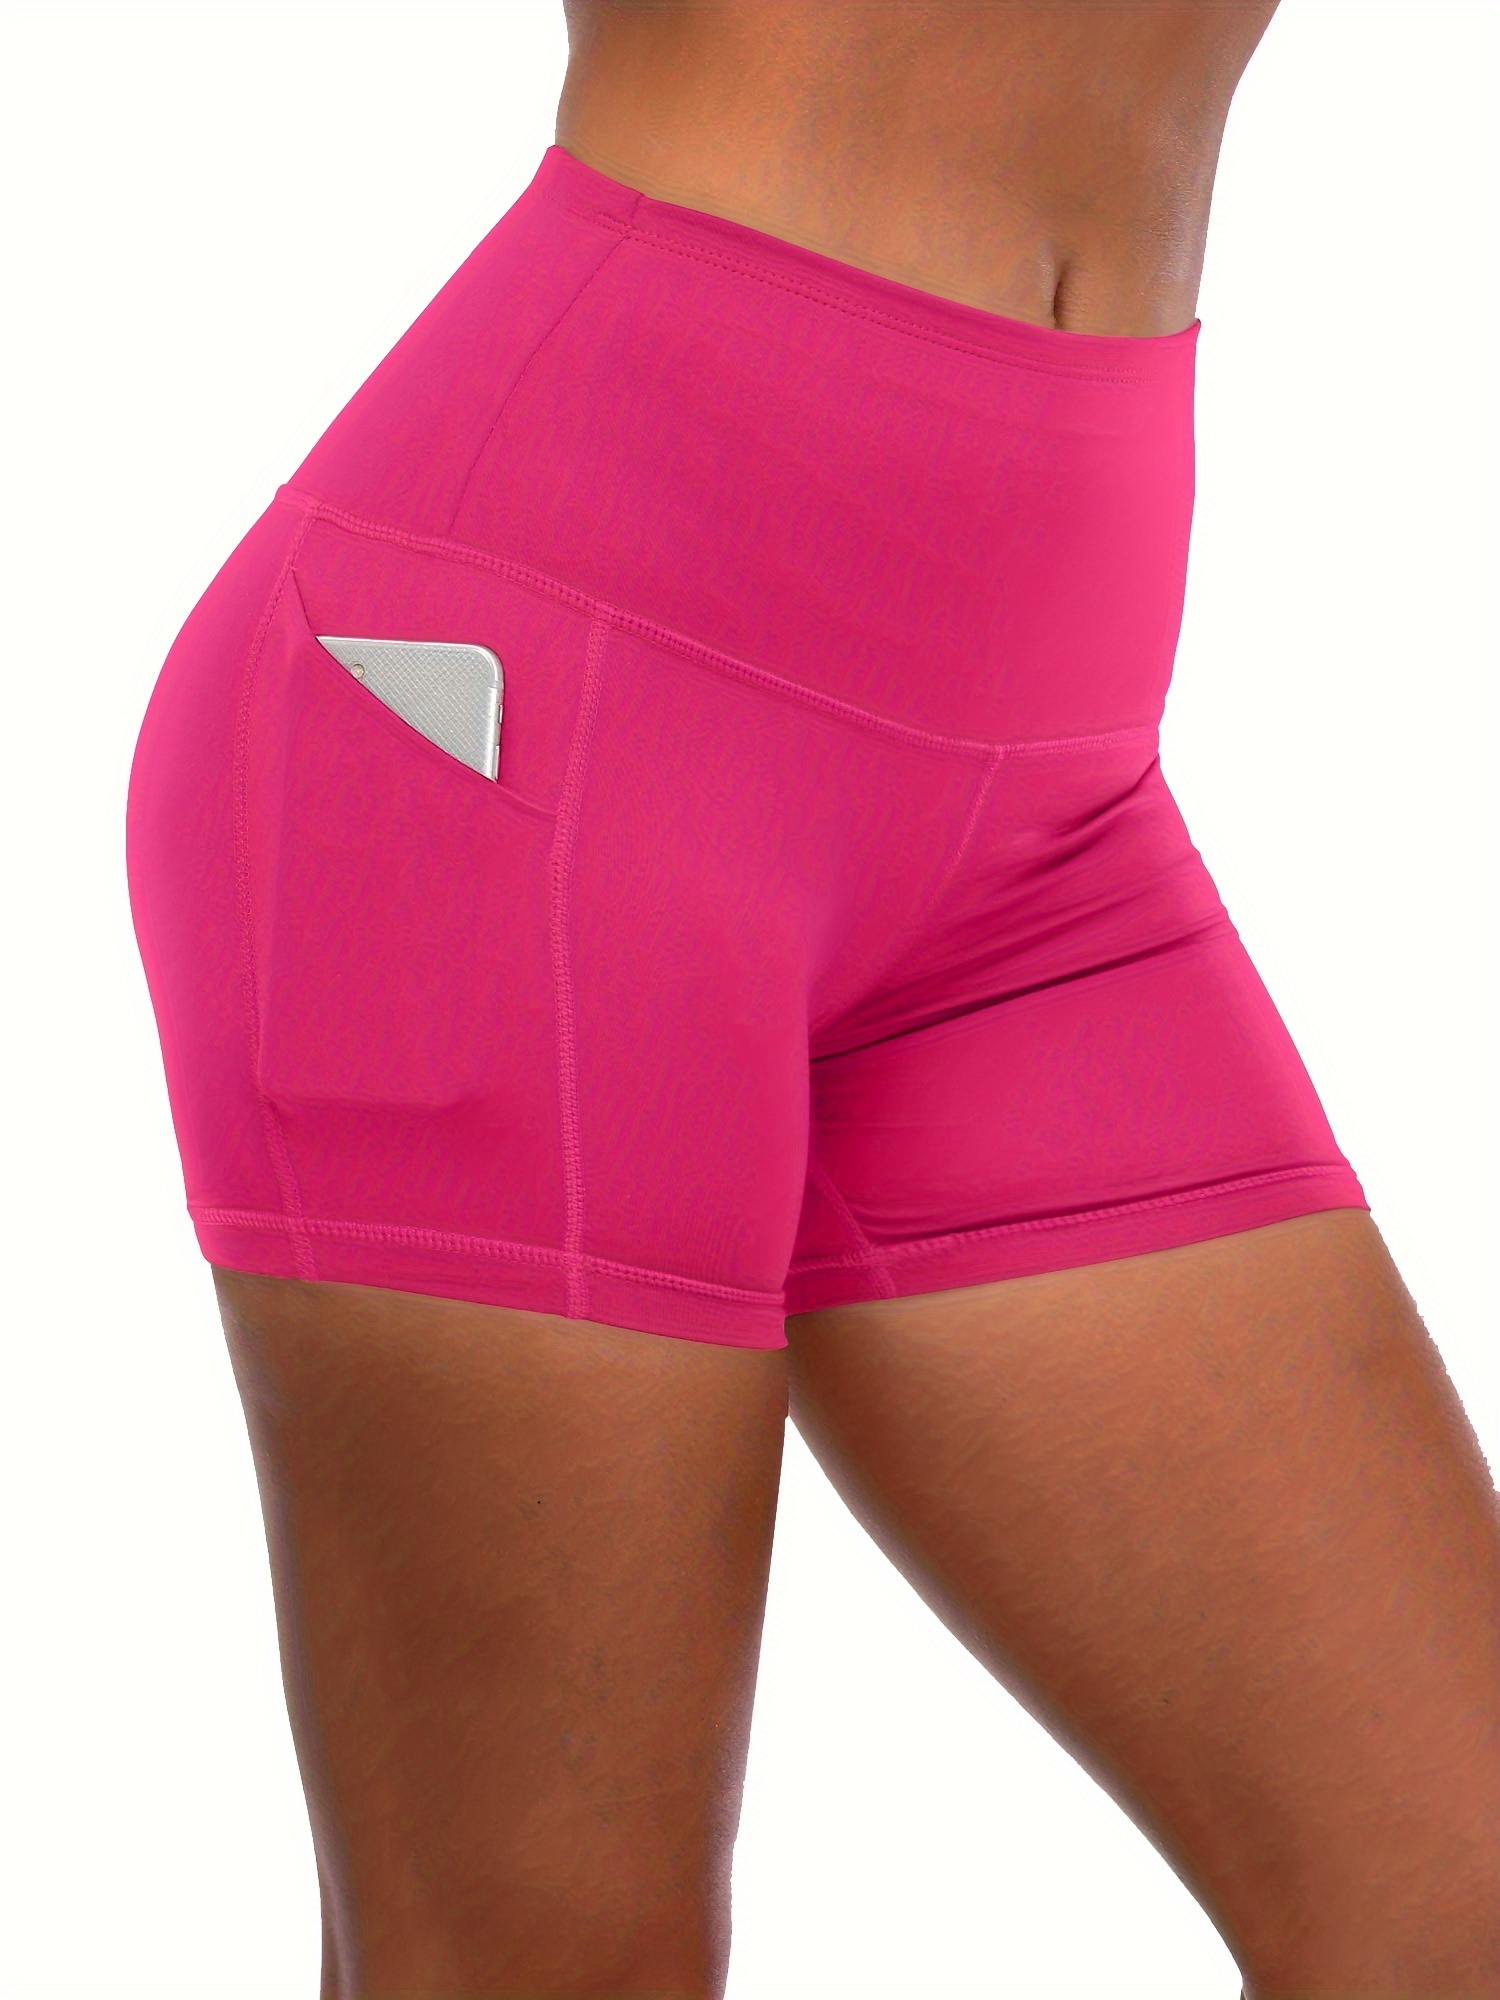 High Waisted Workout Shorts with Pockets | 5-8 Breathable Yoga Shorts for  Gym | Women Biker Short for Tummy Control